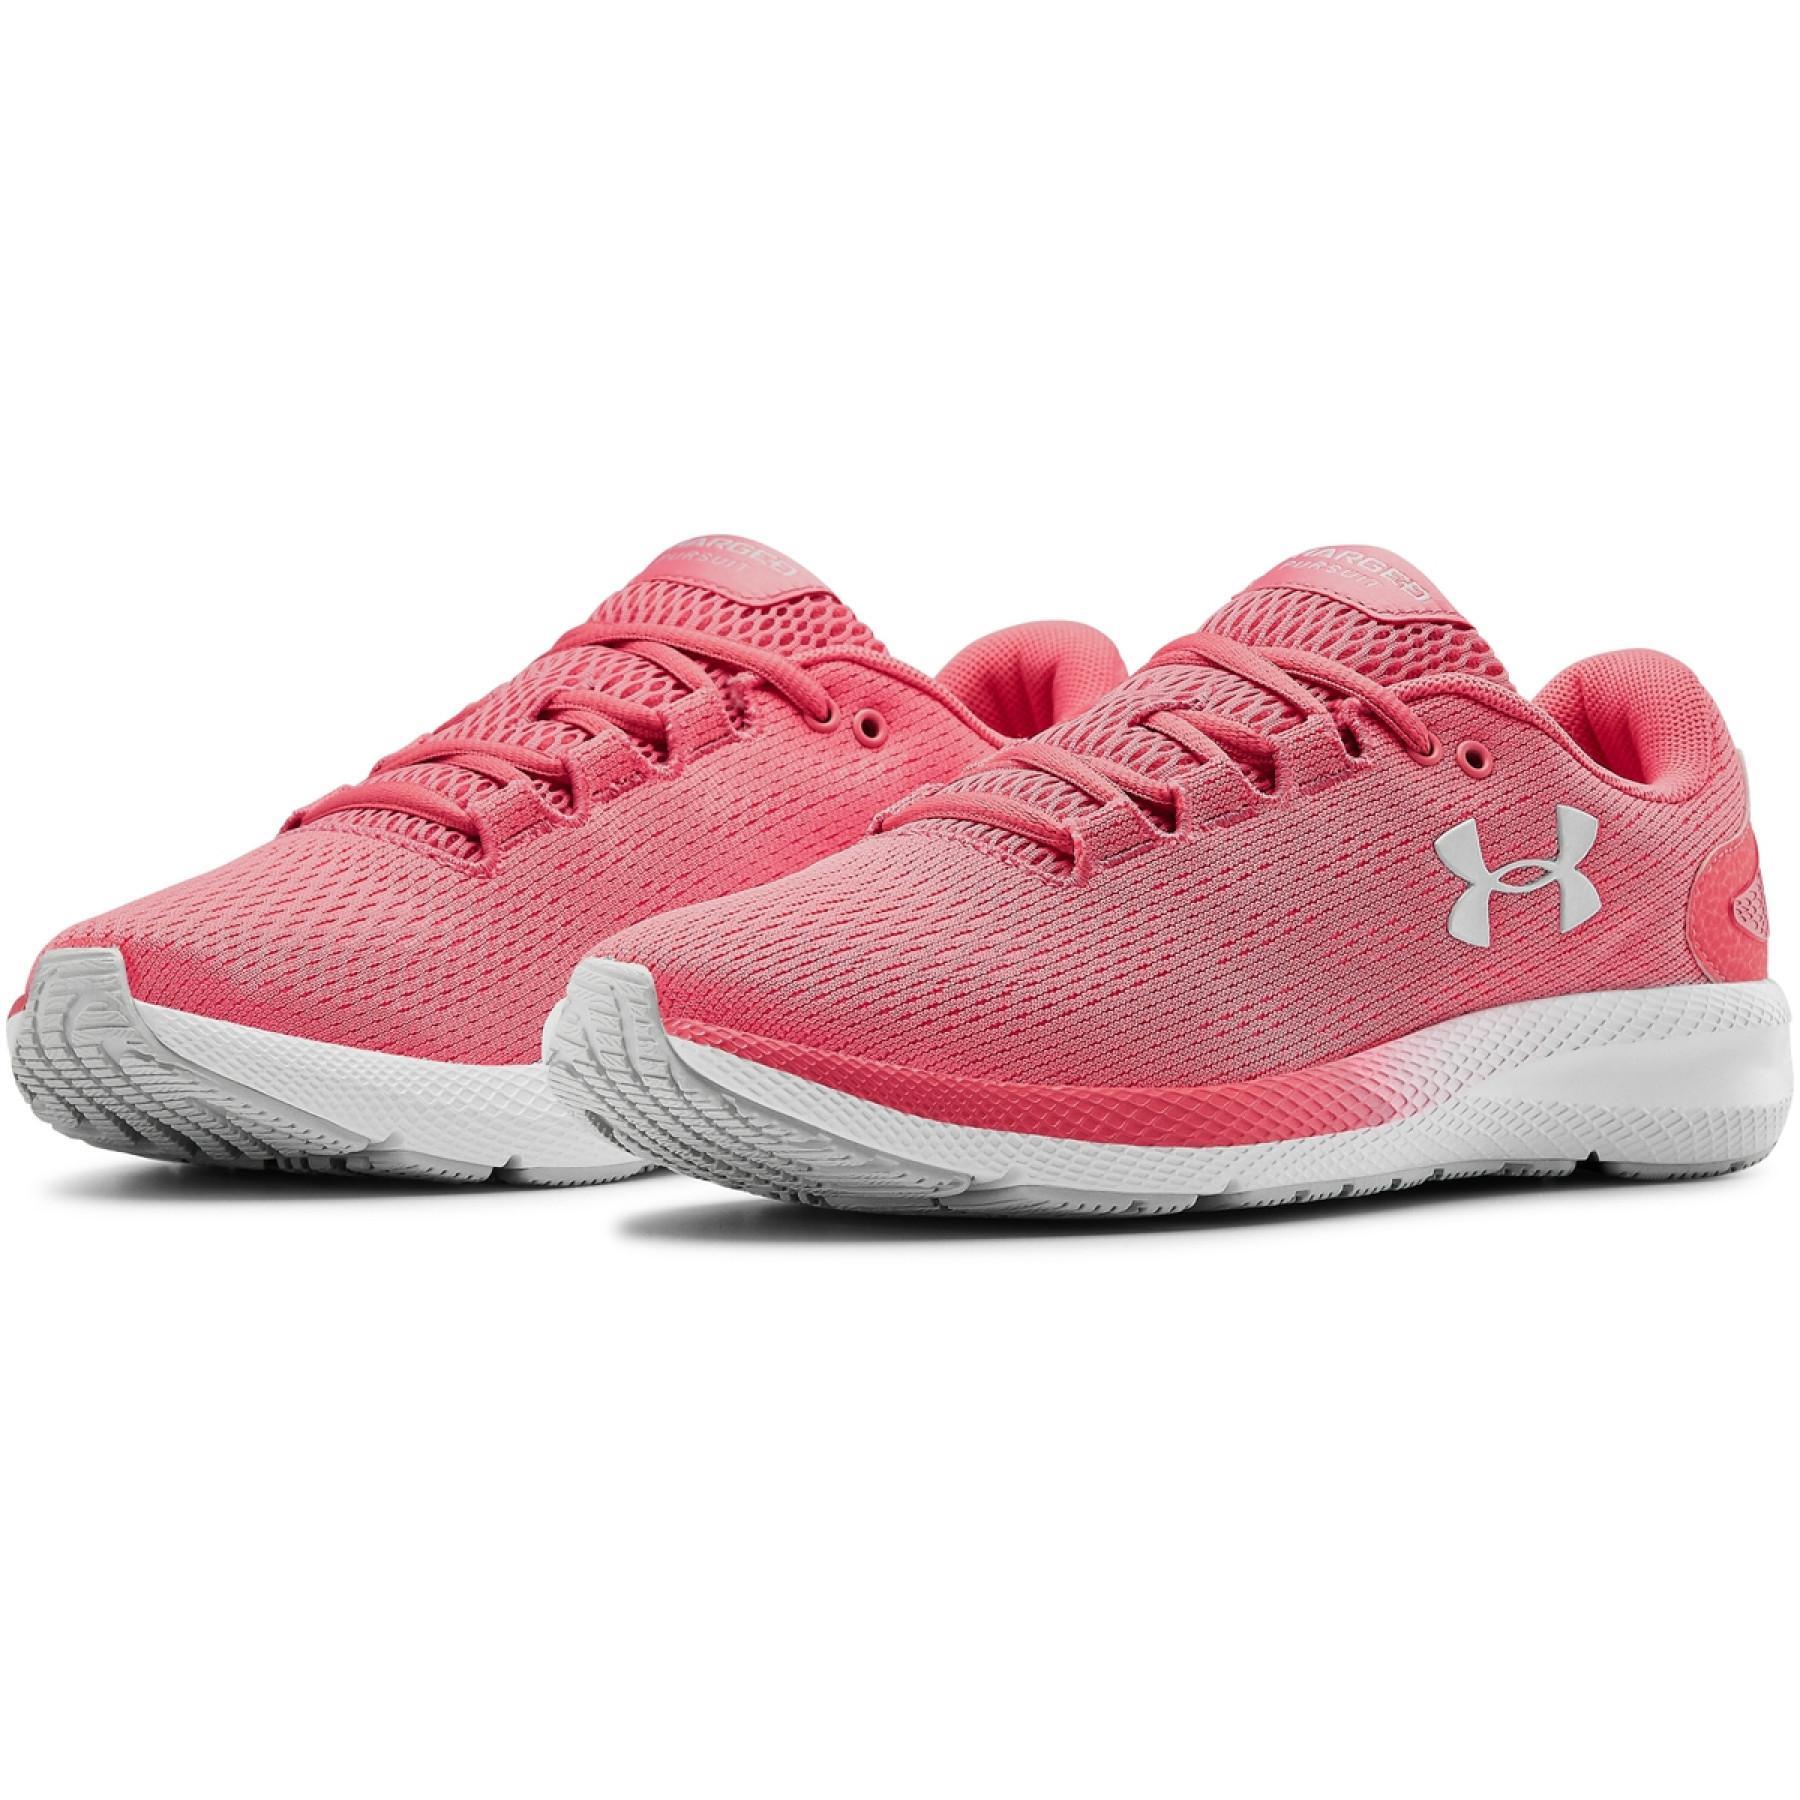 Zapatillas de running para mujer Under Armour Charged Pursuit 2